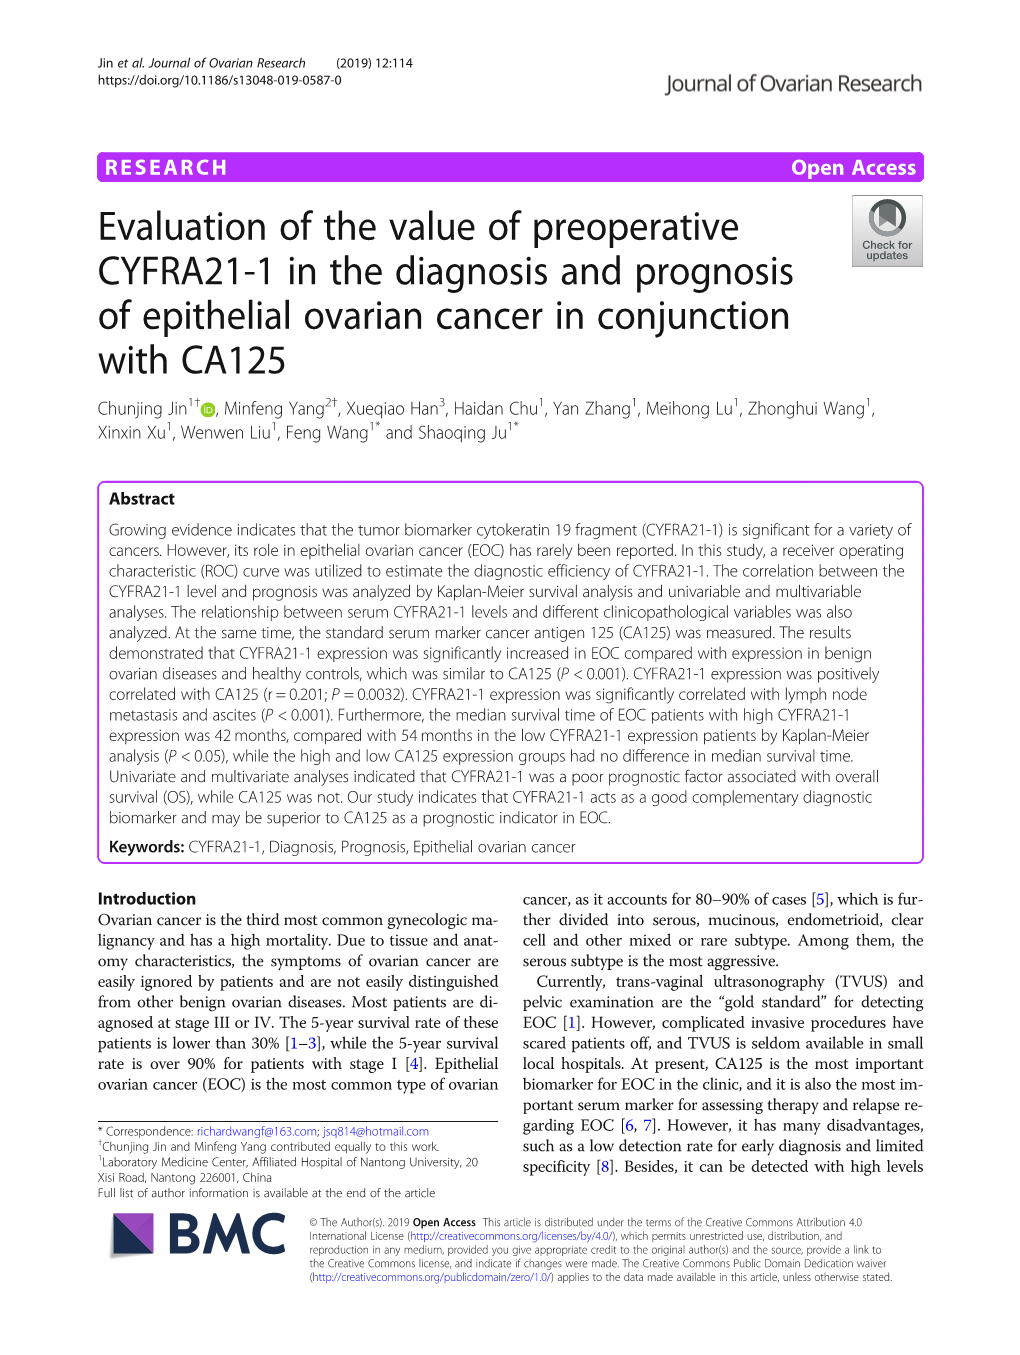 Evaluation of the Value of Preoperative CYFRA21-1 in the Diagnosis And